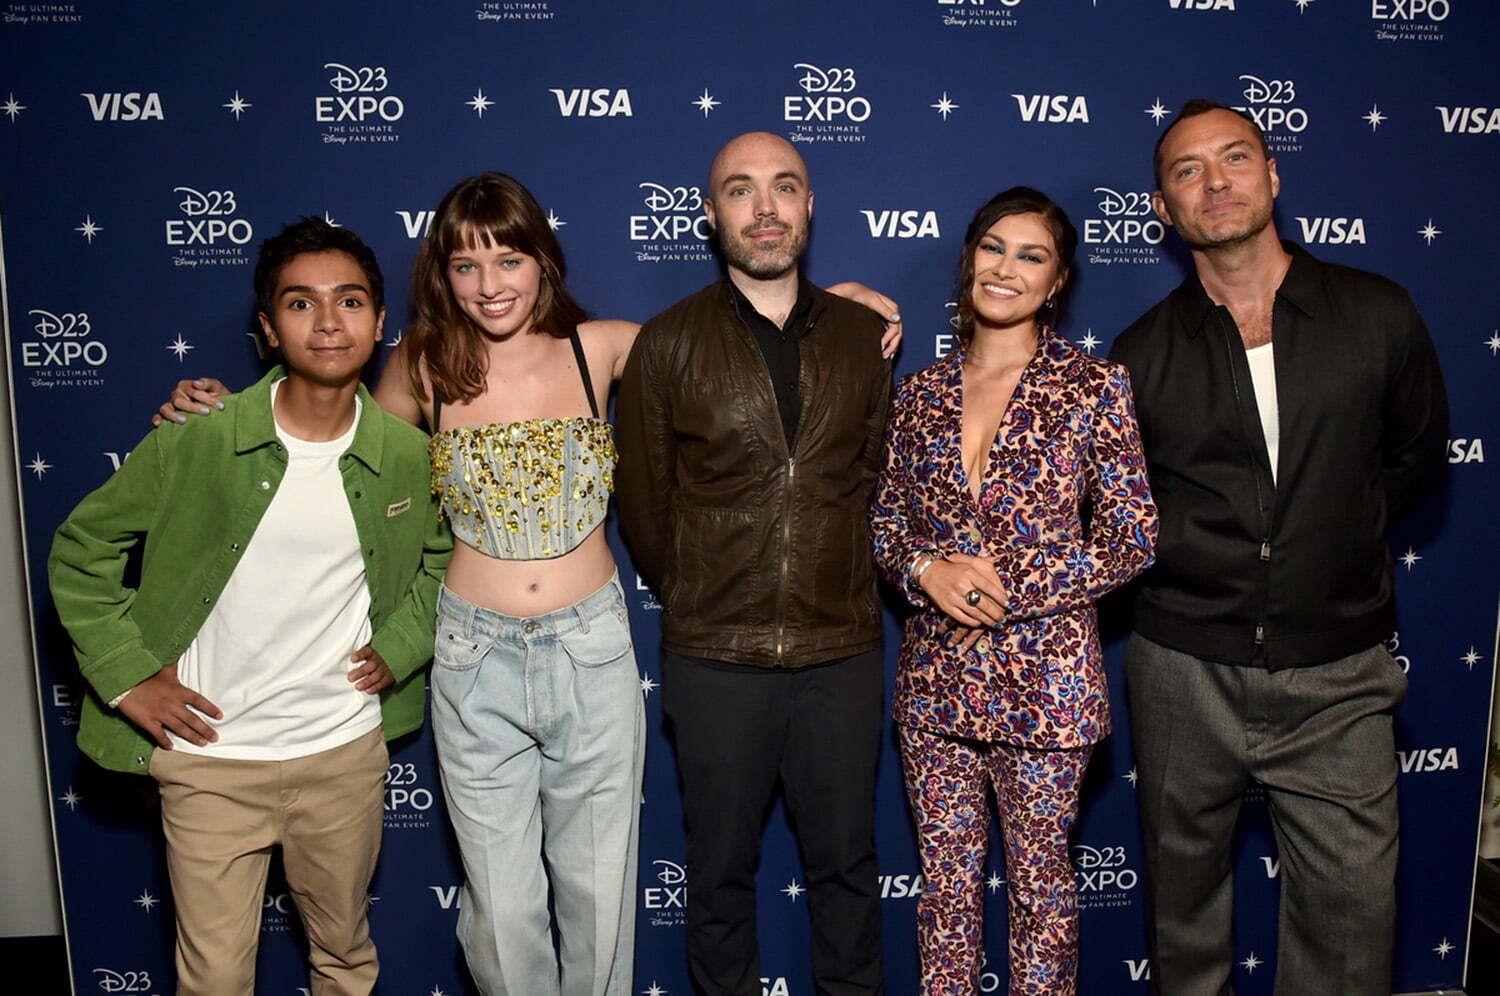 (L-R) Alexander Molony, Ever Anderson, David Lowery, Alyssa Wapanatâhk, and Jude Law attend D23 Expo 2022 at Anaheim Convention Center in Anaheim, California on September 09, 2022.